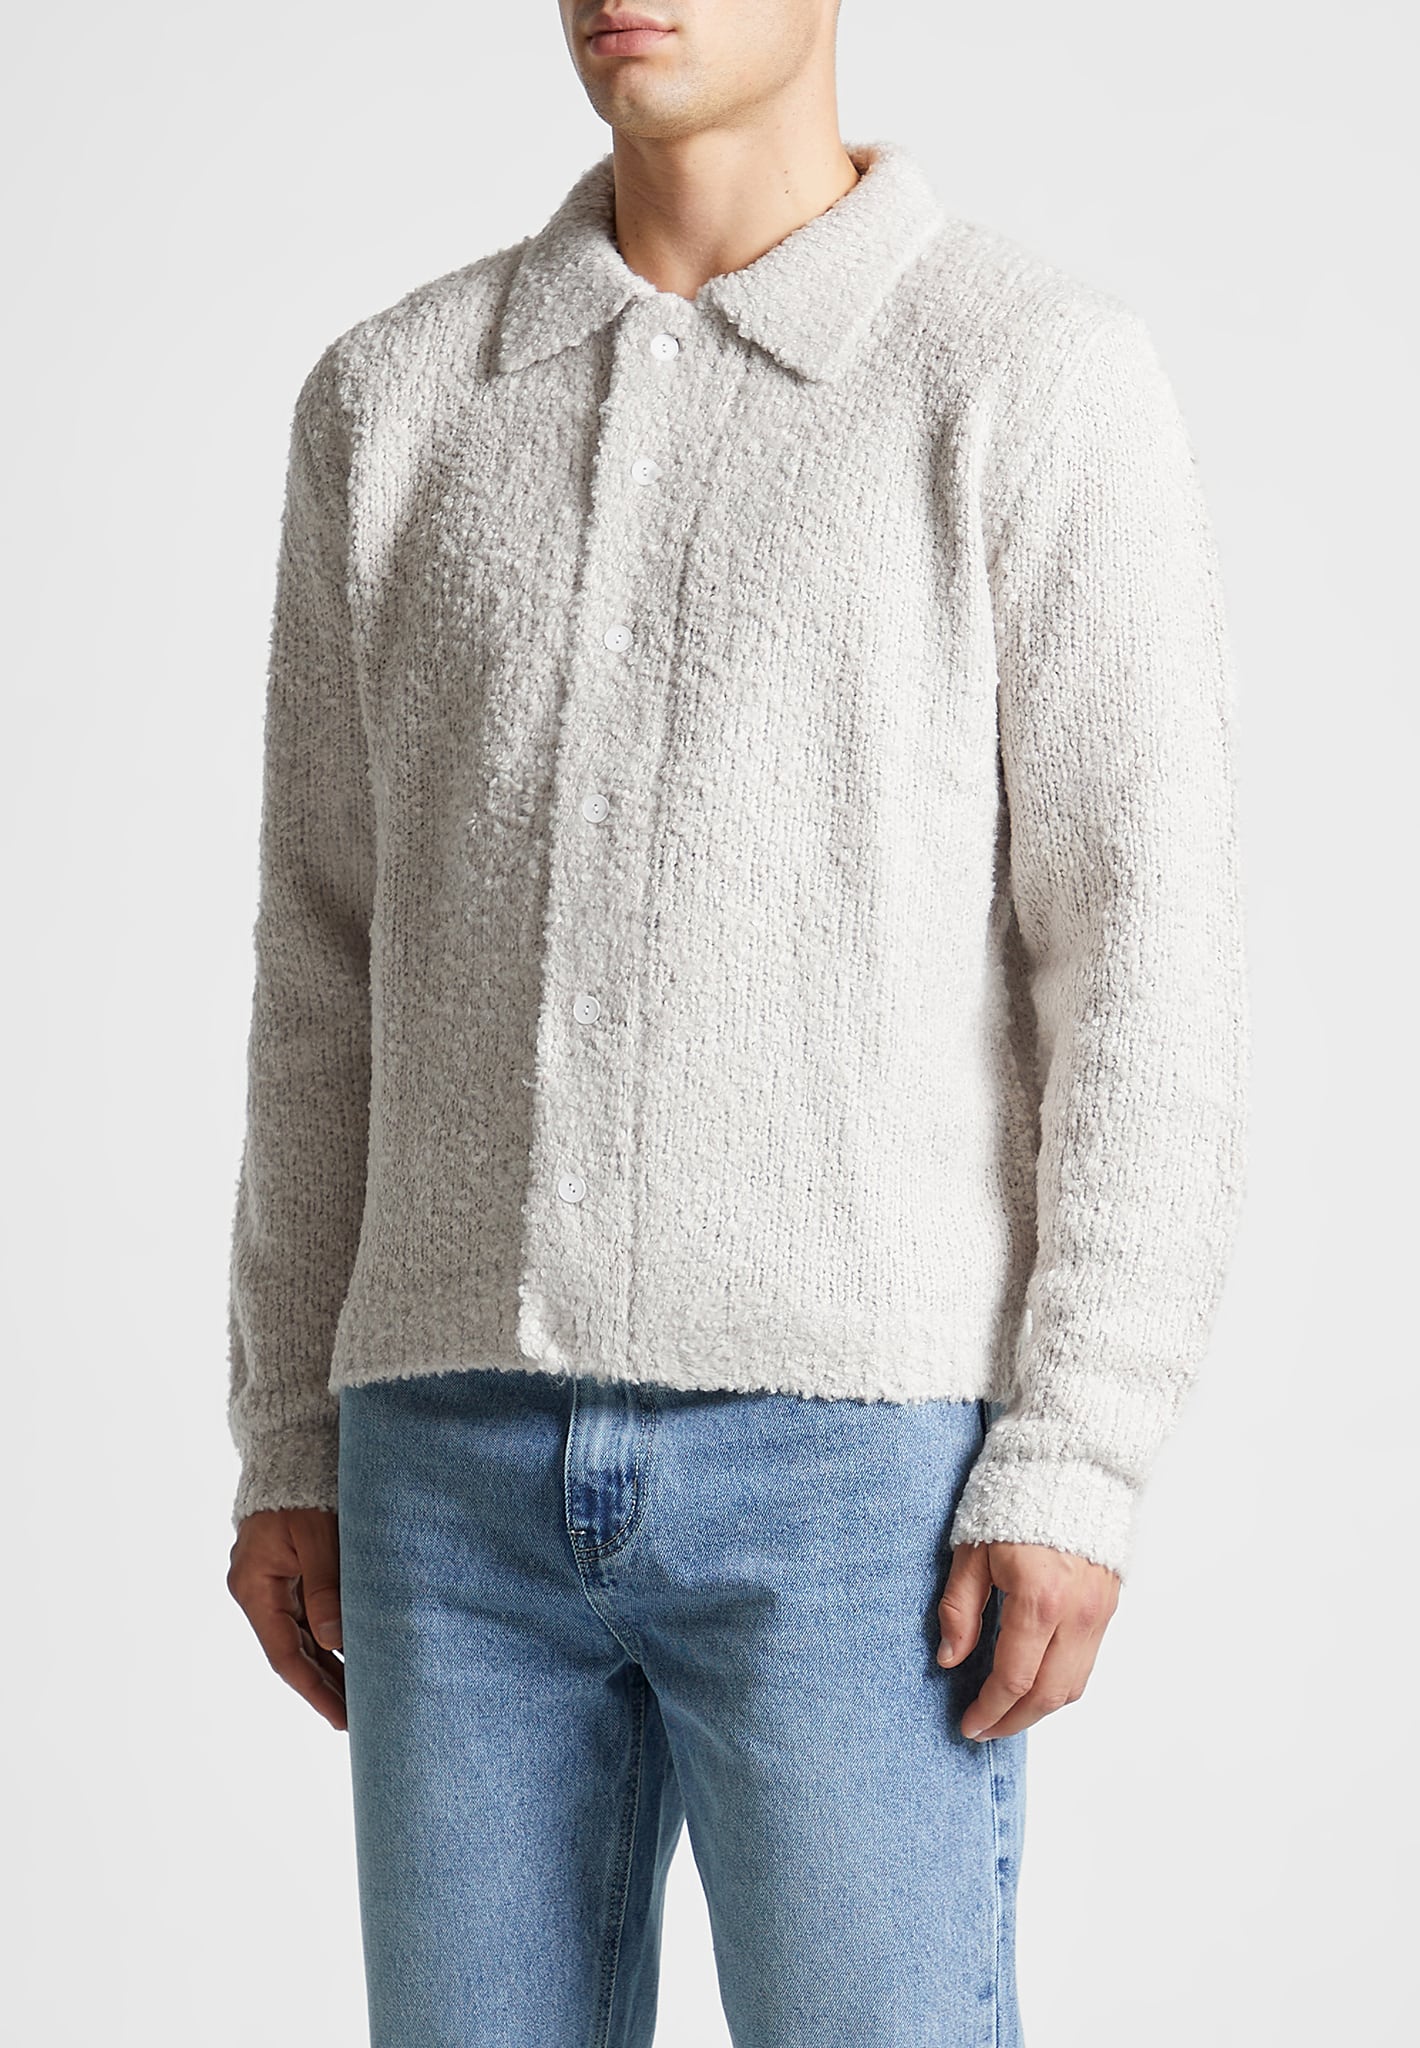 Boucle Knit Button Up Cardigan - Stone